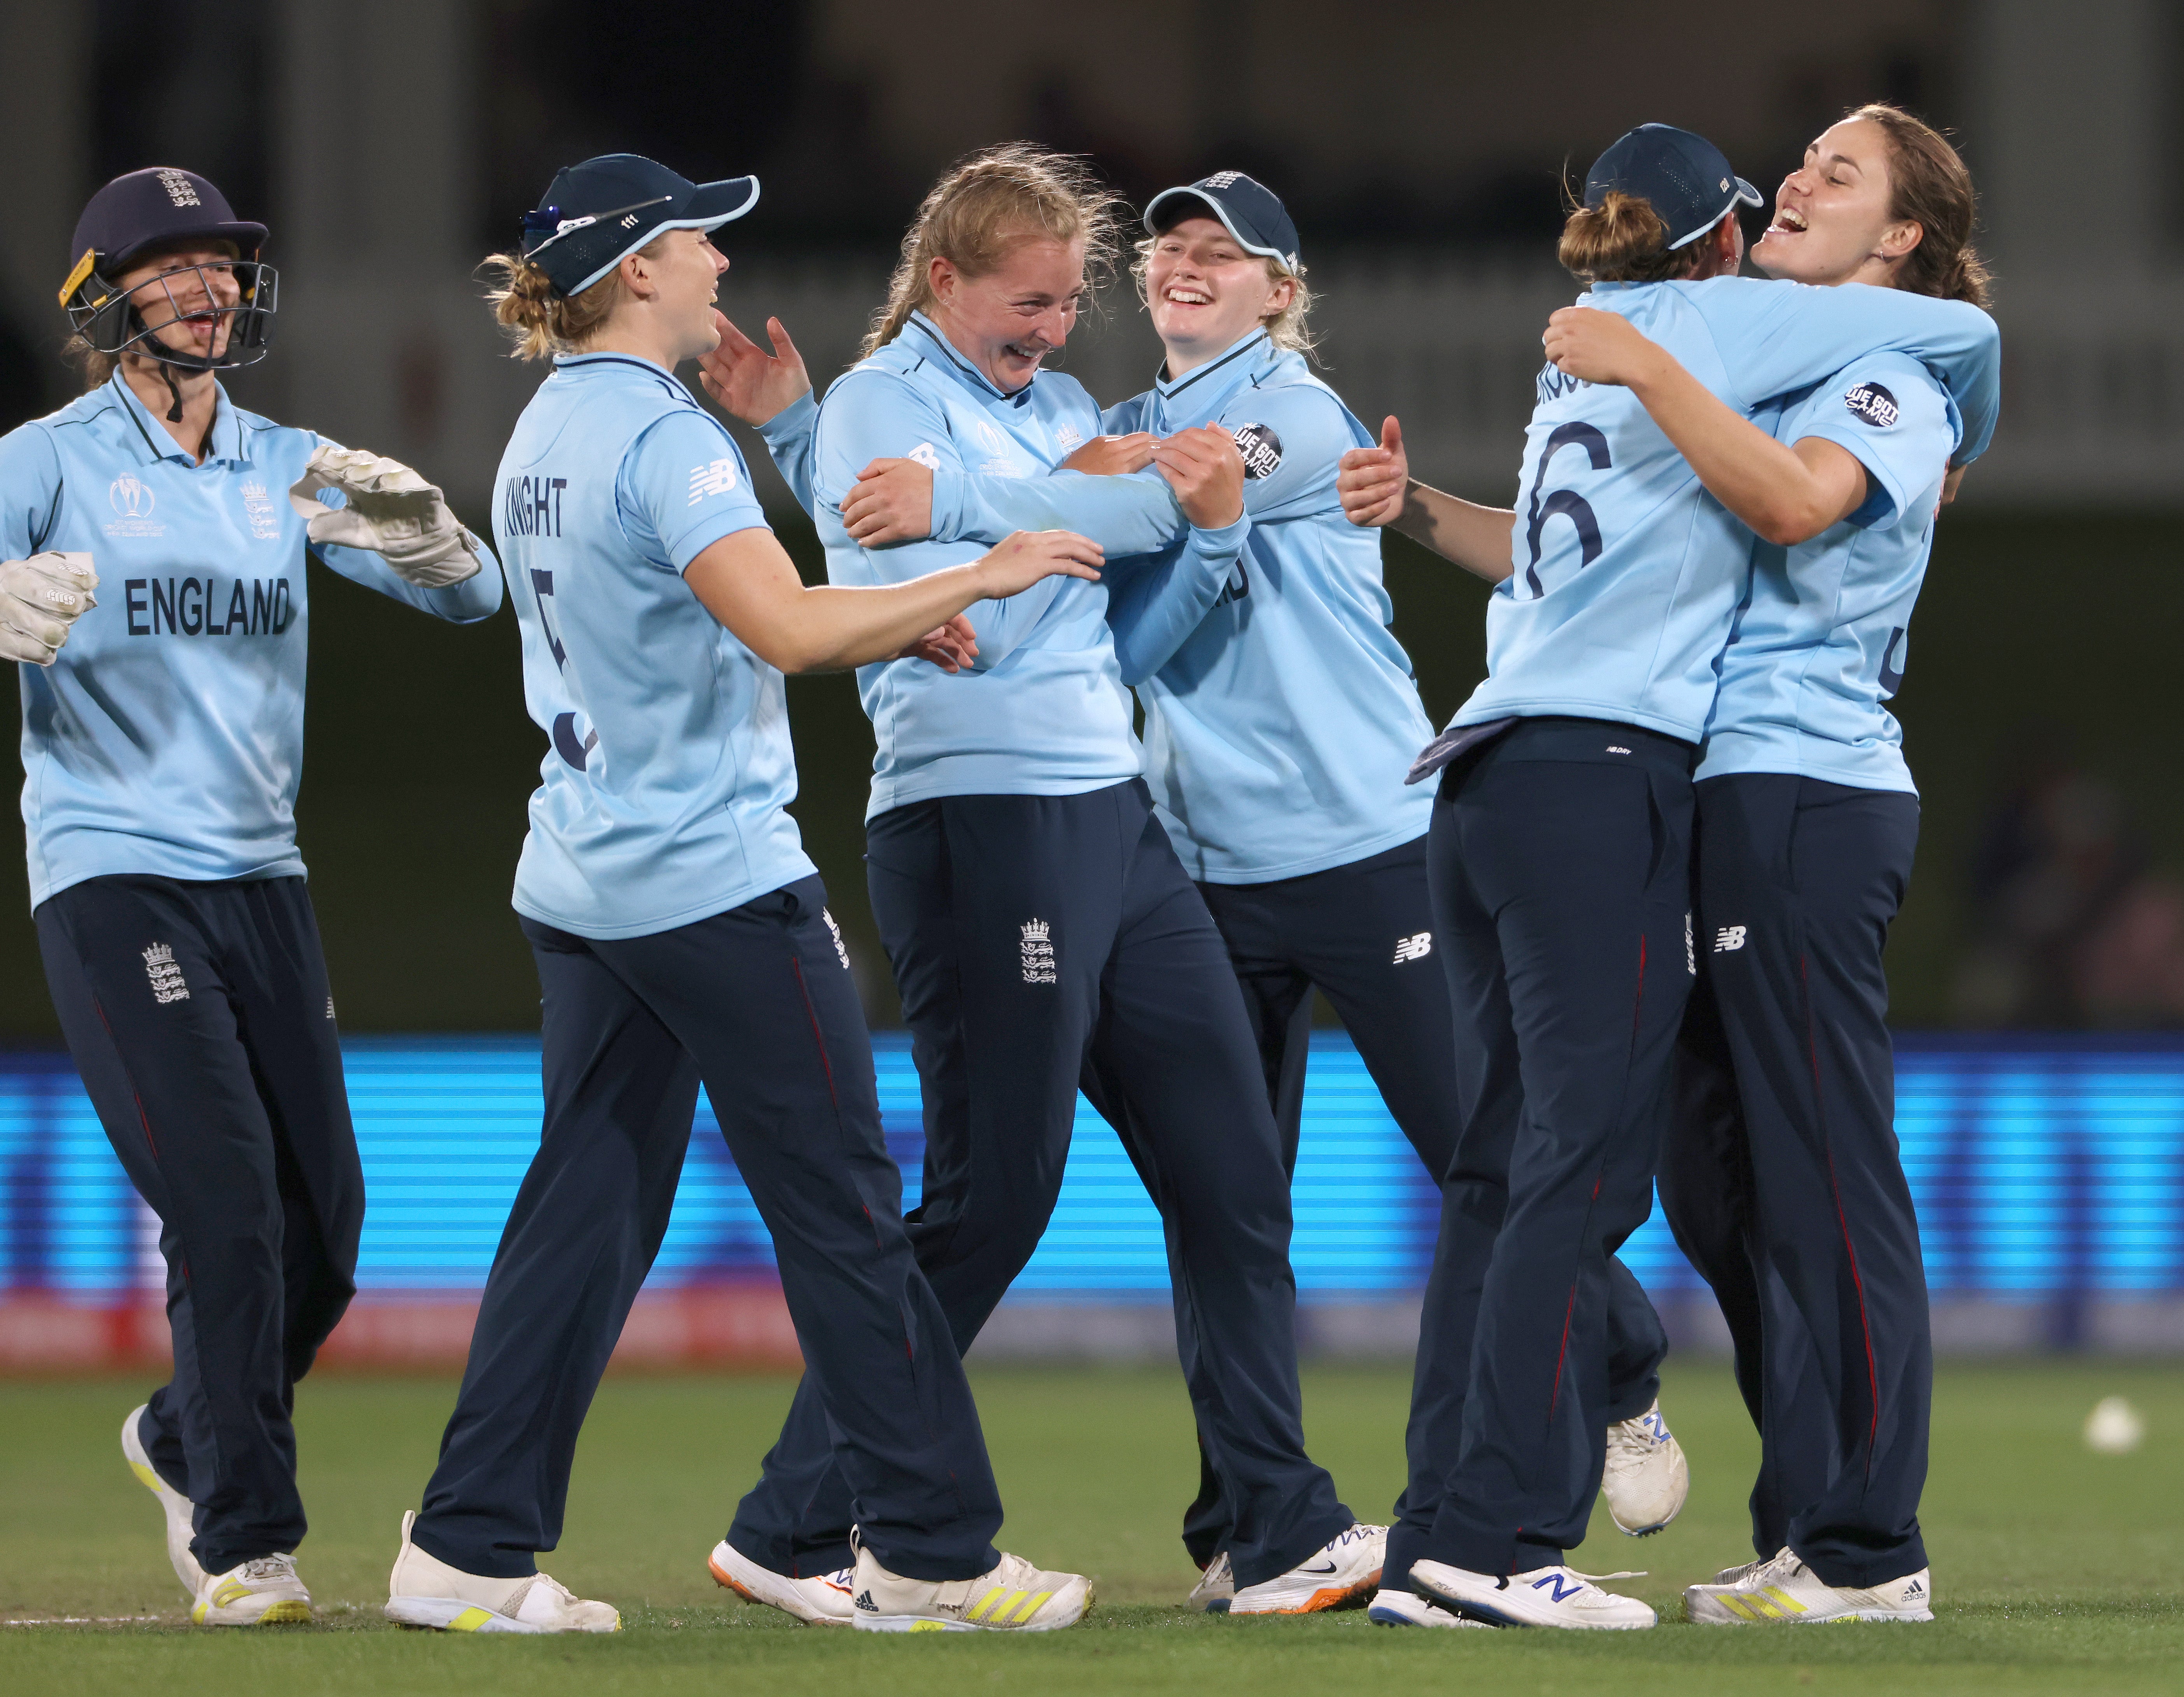 England celebrate another wicket against South Africa in the semi-final